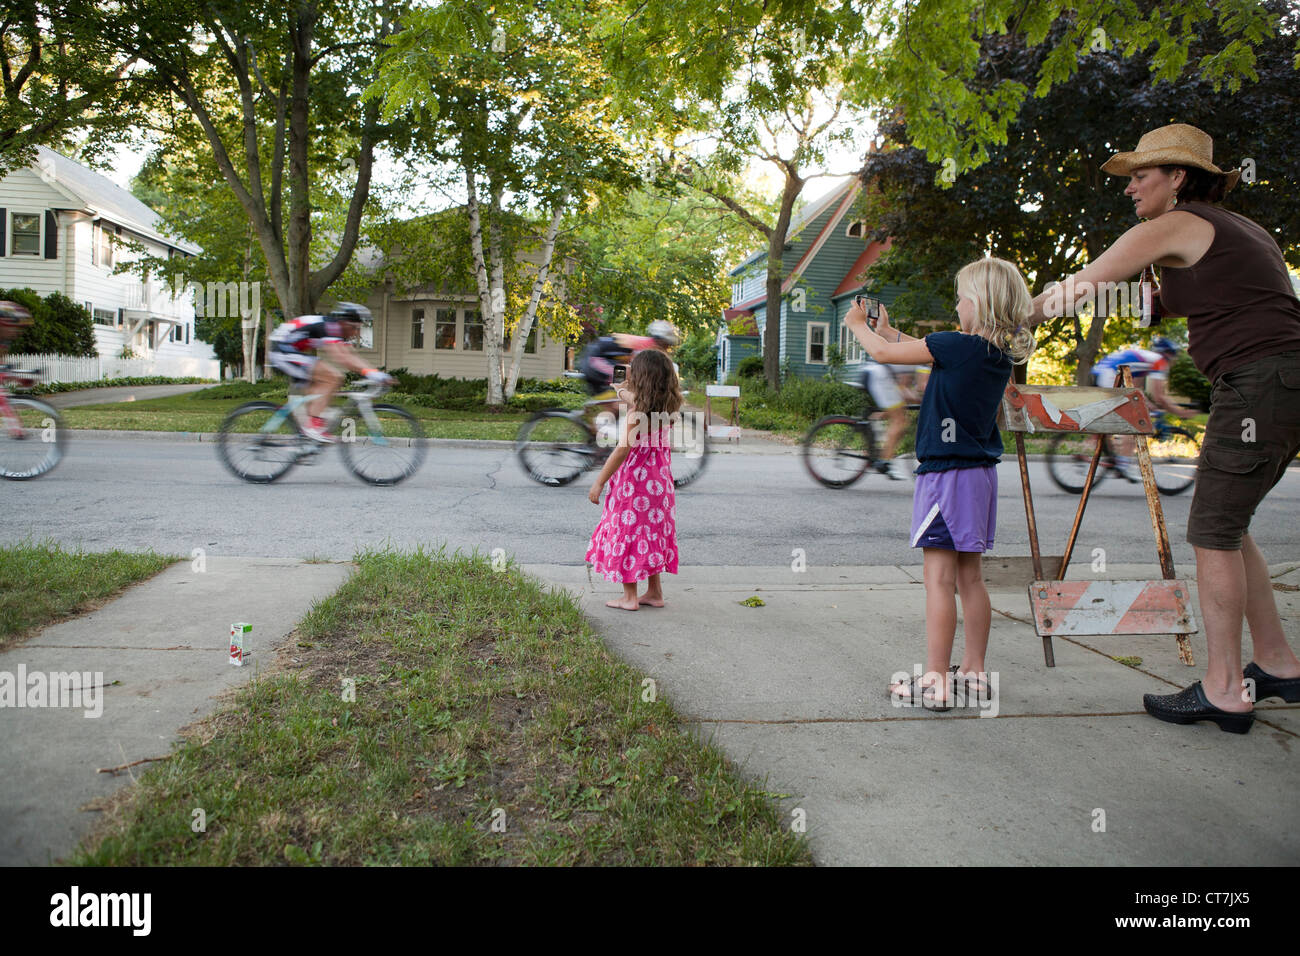 The Shorewood, Wisconsin Criterium is an annual event on the streets of this village. Stock Photo